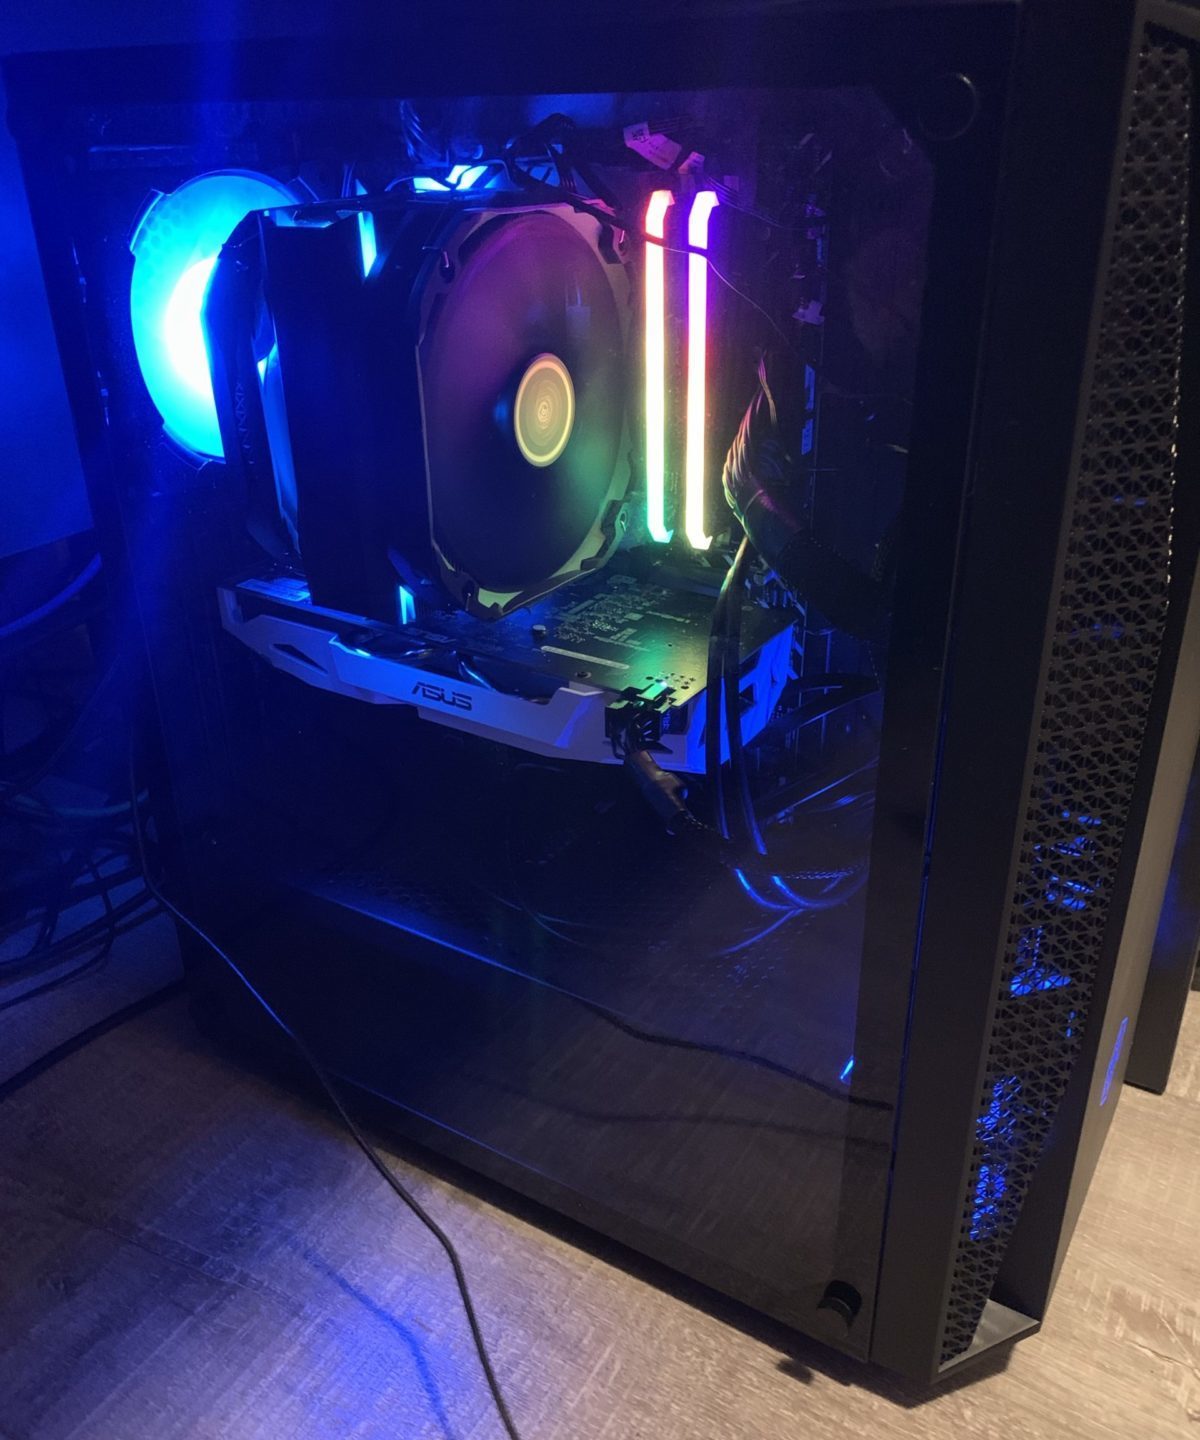 2021 PC Build with Intel i5-12600K CPU